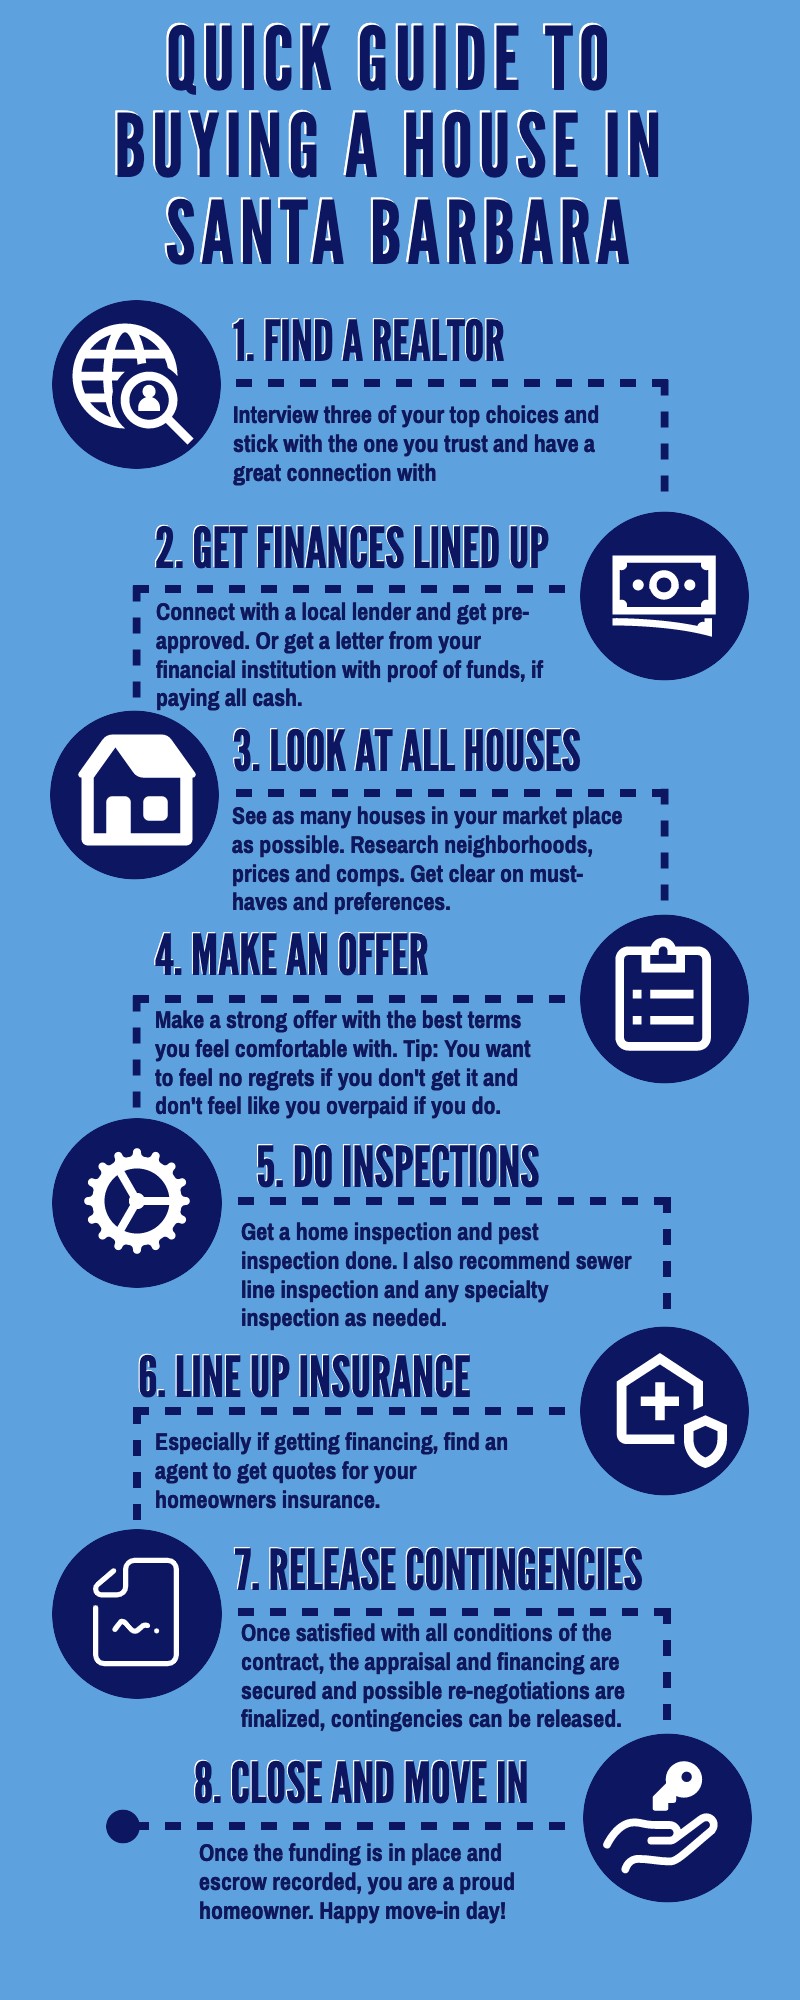 Five Must-Have Tips for First Time Home Buyers